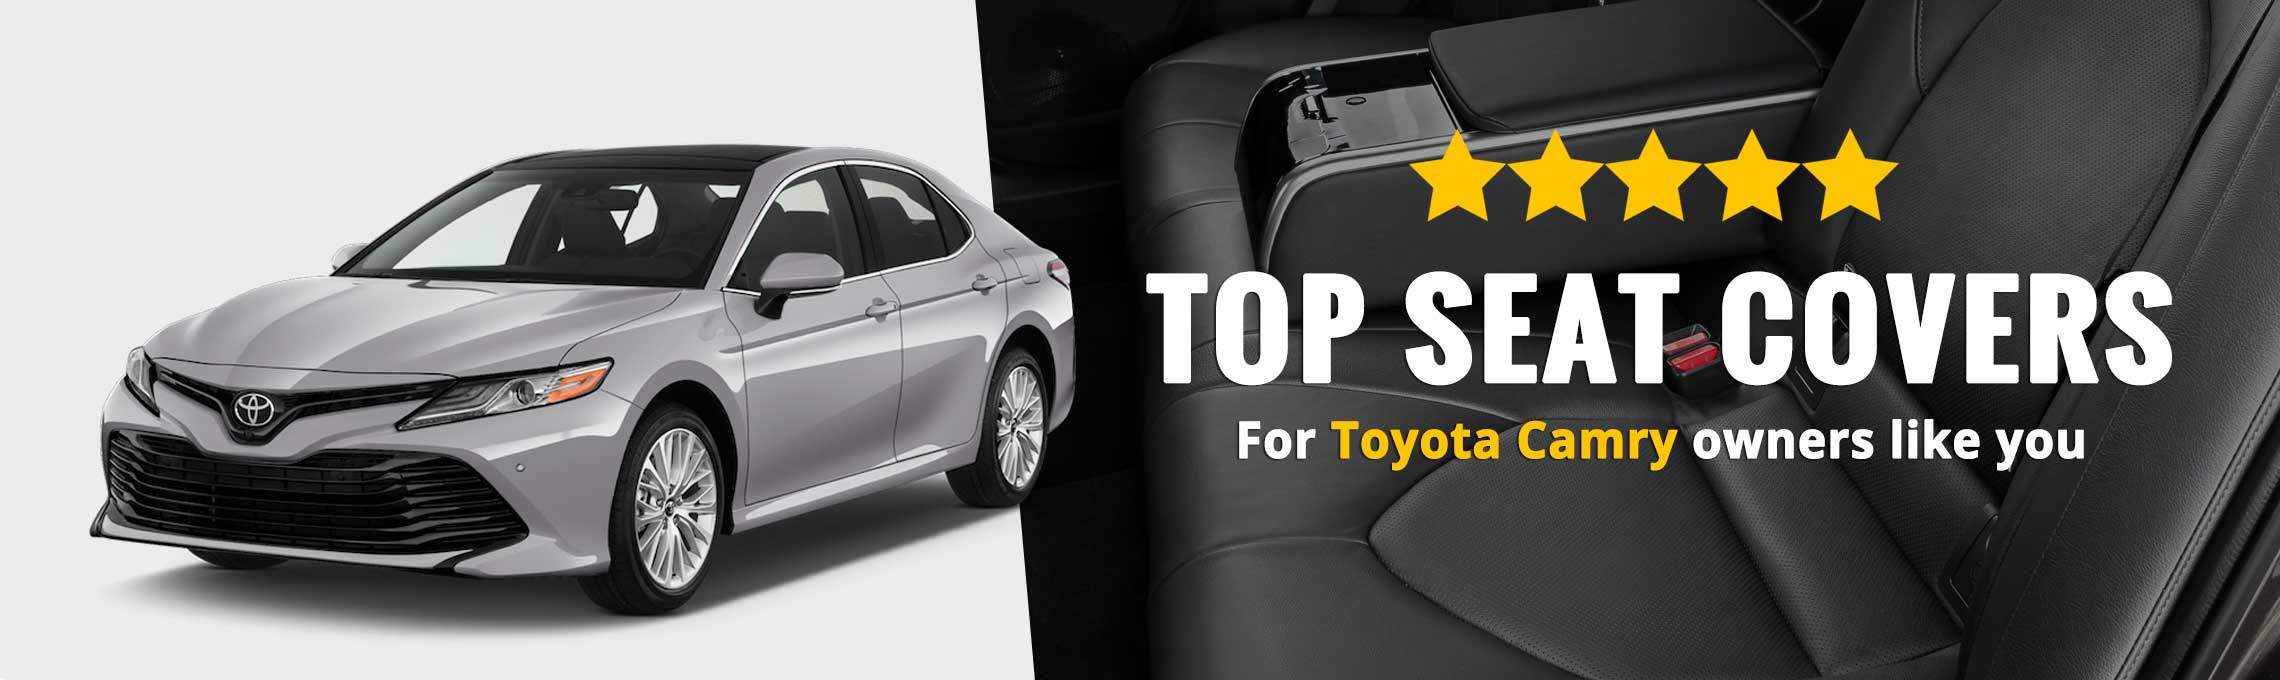 Toyota Camry Seat Covers | Custom Fit Seat Covers & Protectors